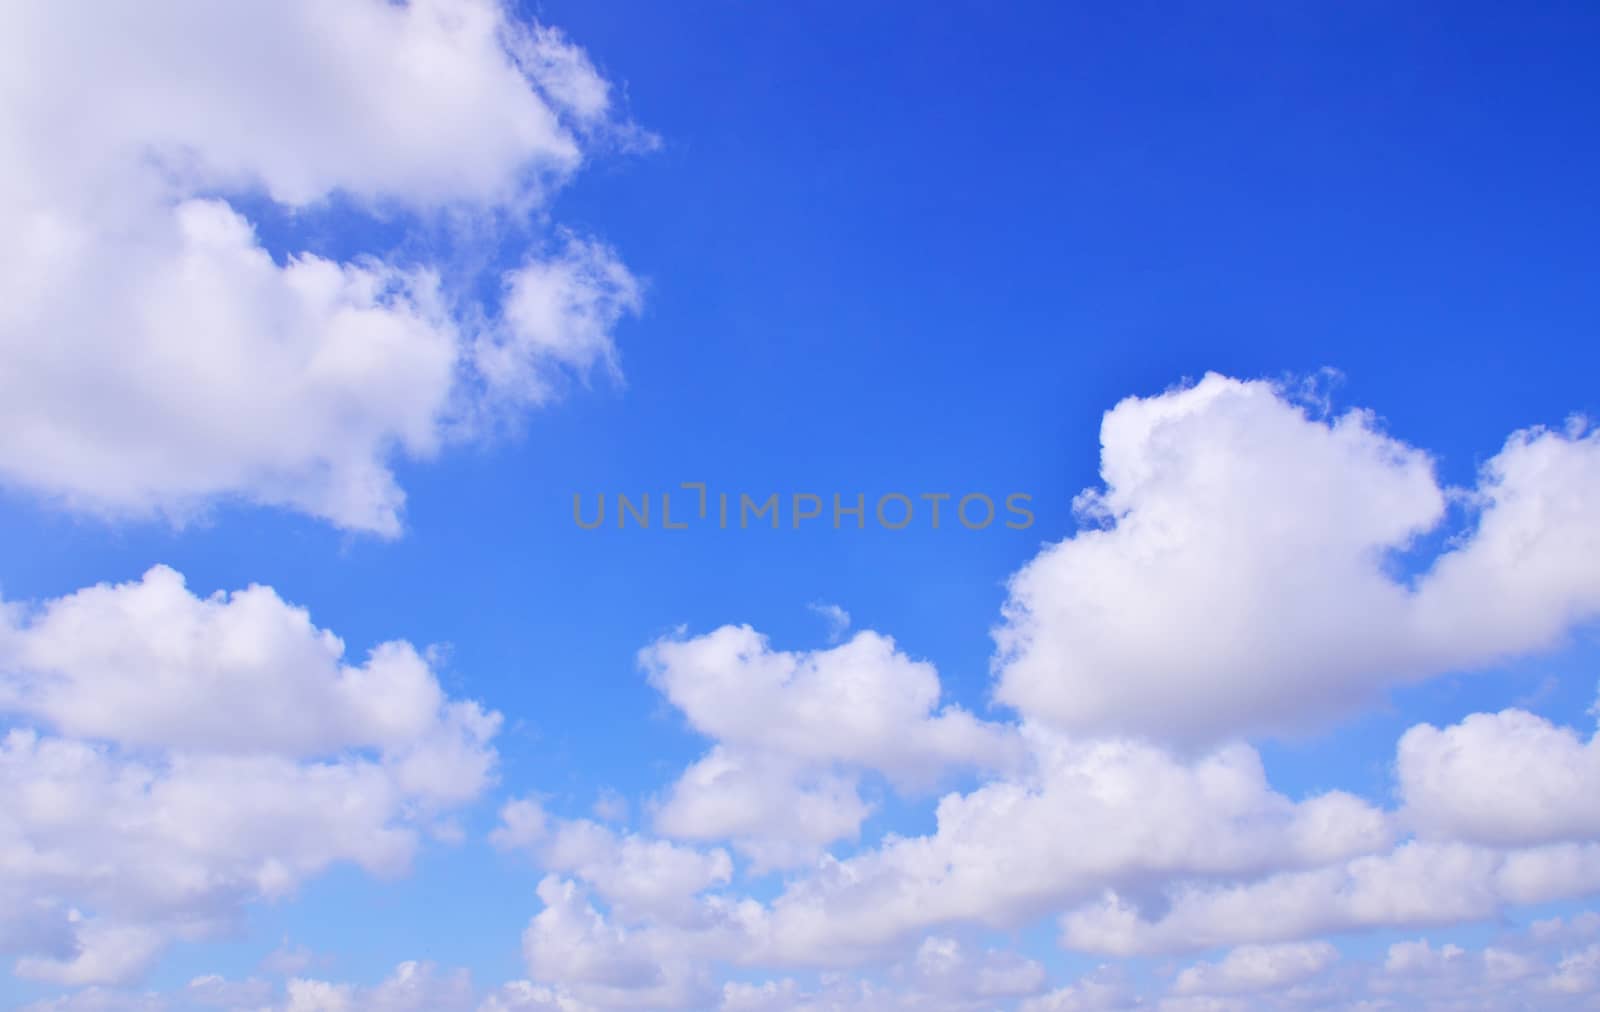 The vast blue sky with clouds